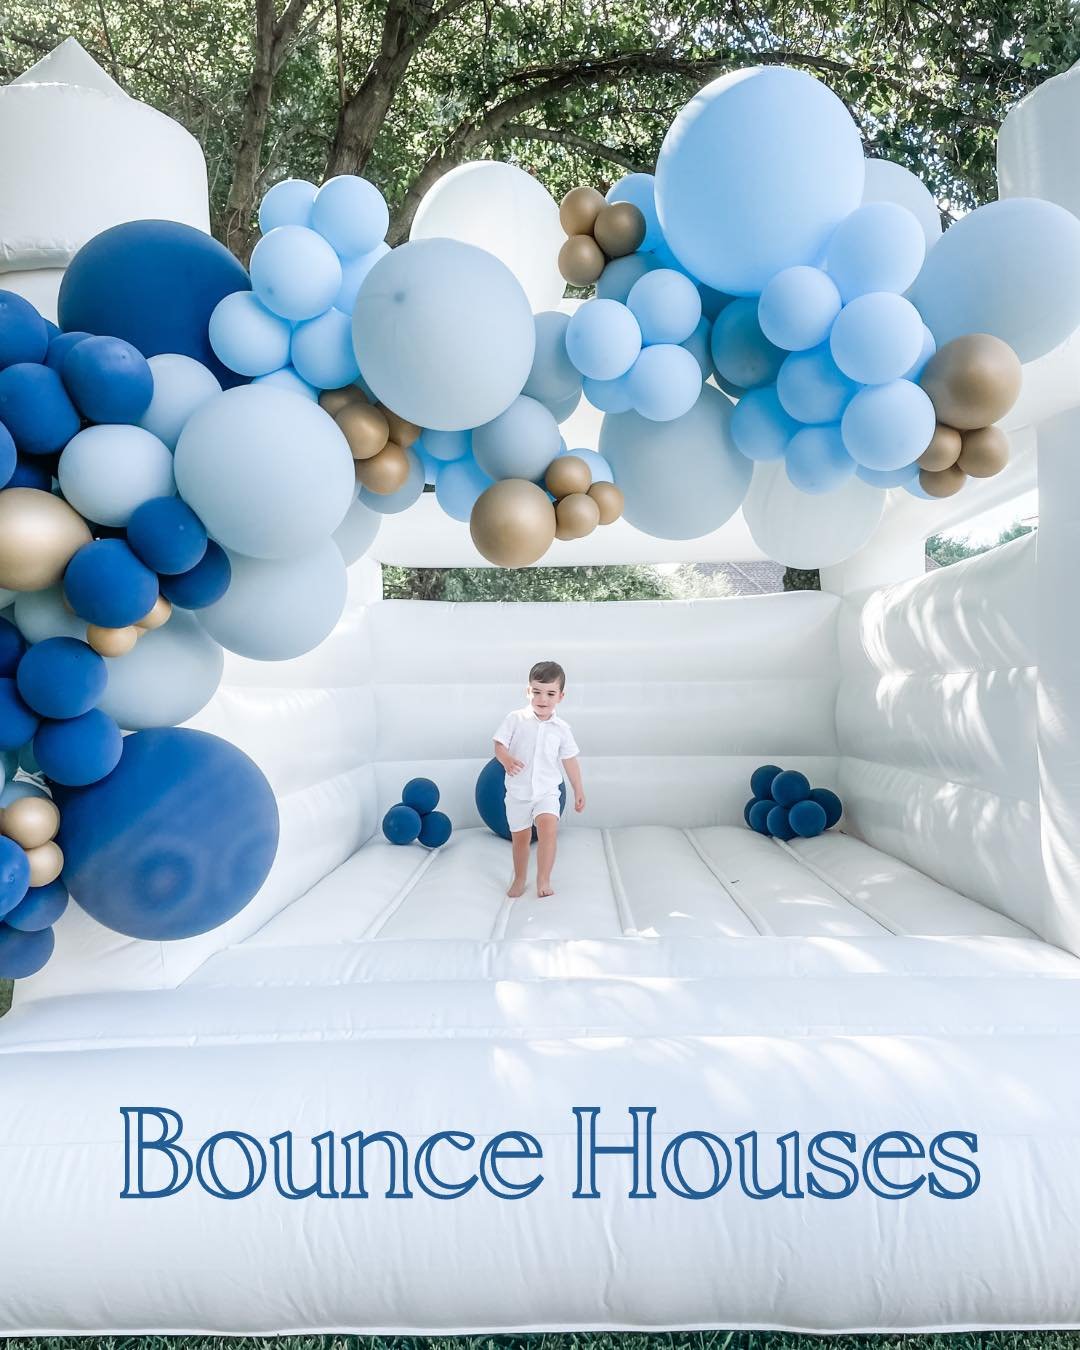 Jump into the fun with Up Up Balloons bounce house balloon decor &amp; elevate the excitment at your next event! 🎈

You provide the bounce house and we'll make it ✨fun✨